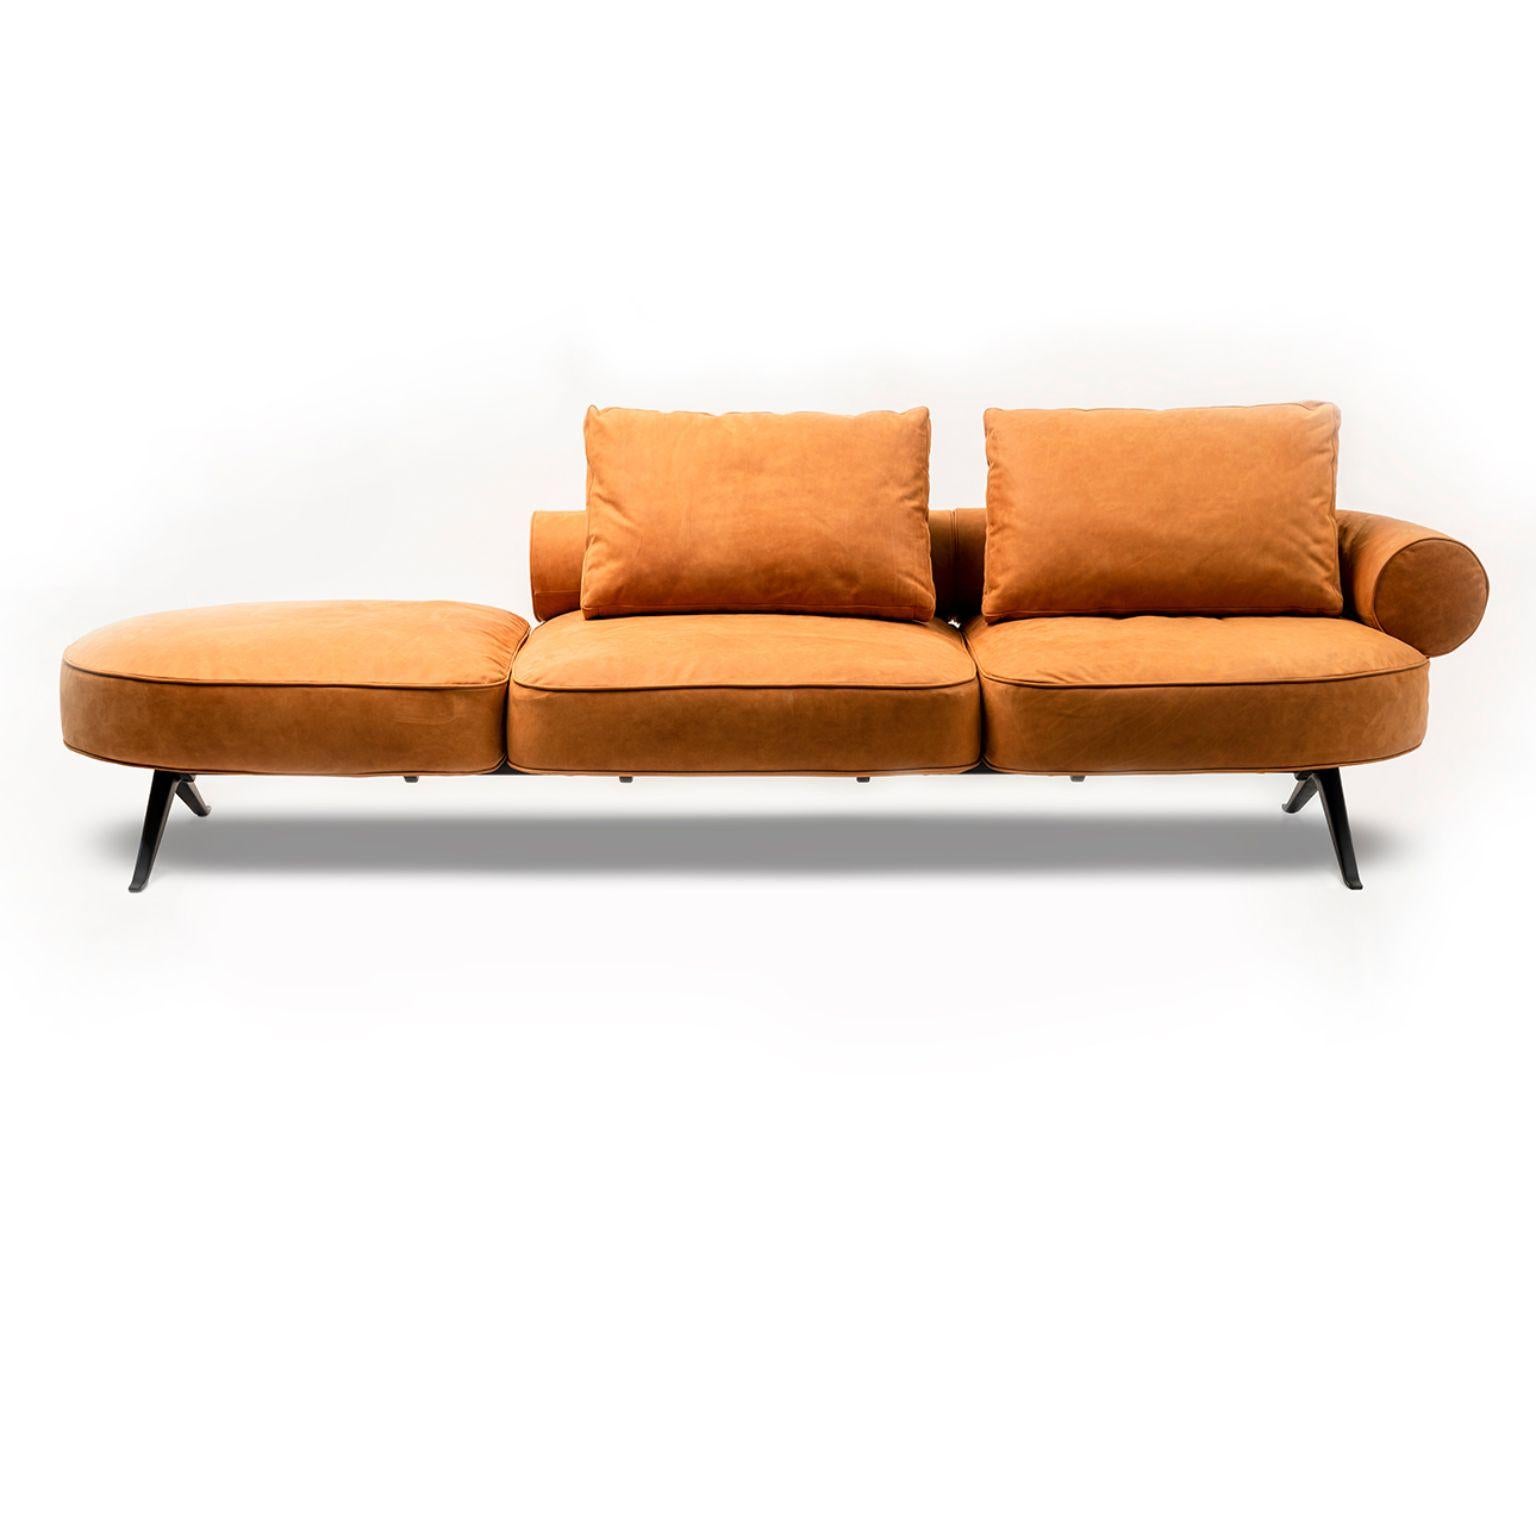 Metal Luizet Modular Sofa by Luca Nichetto For Sale